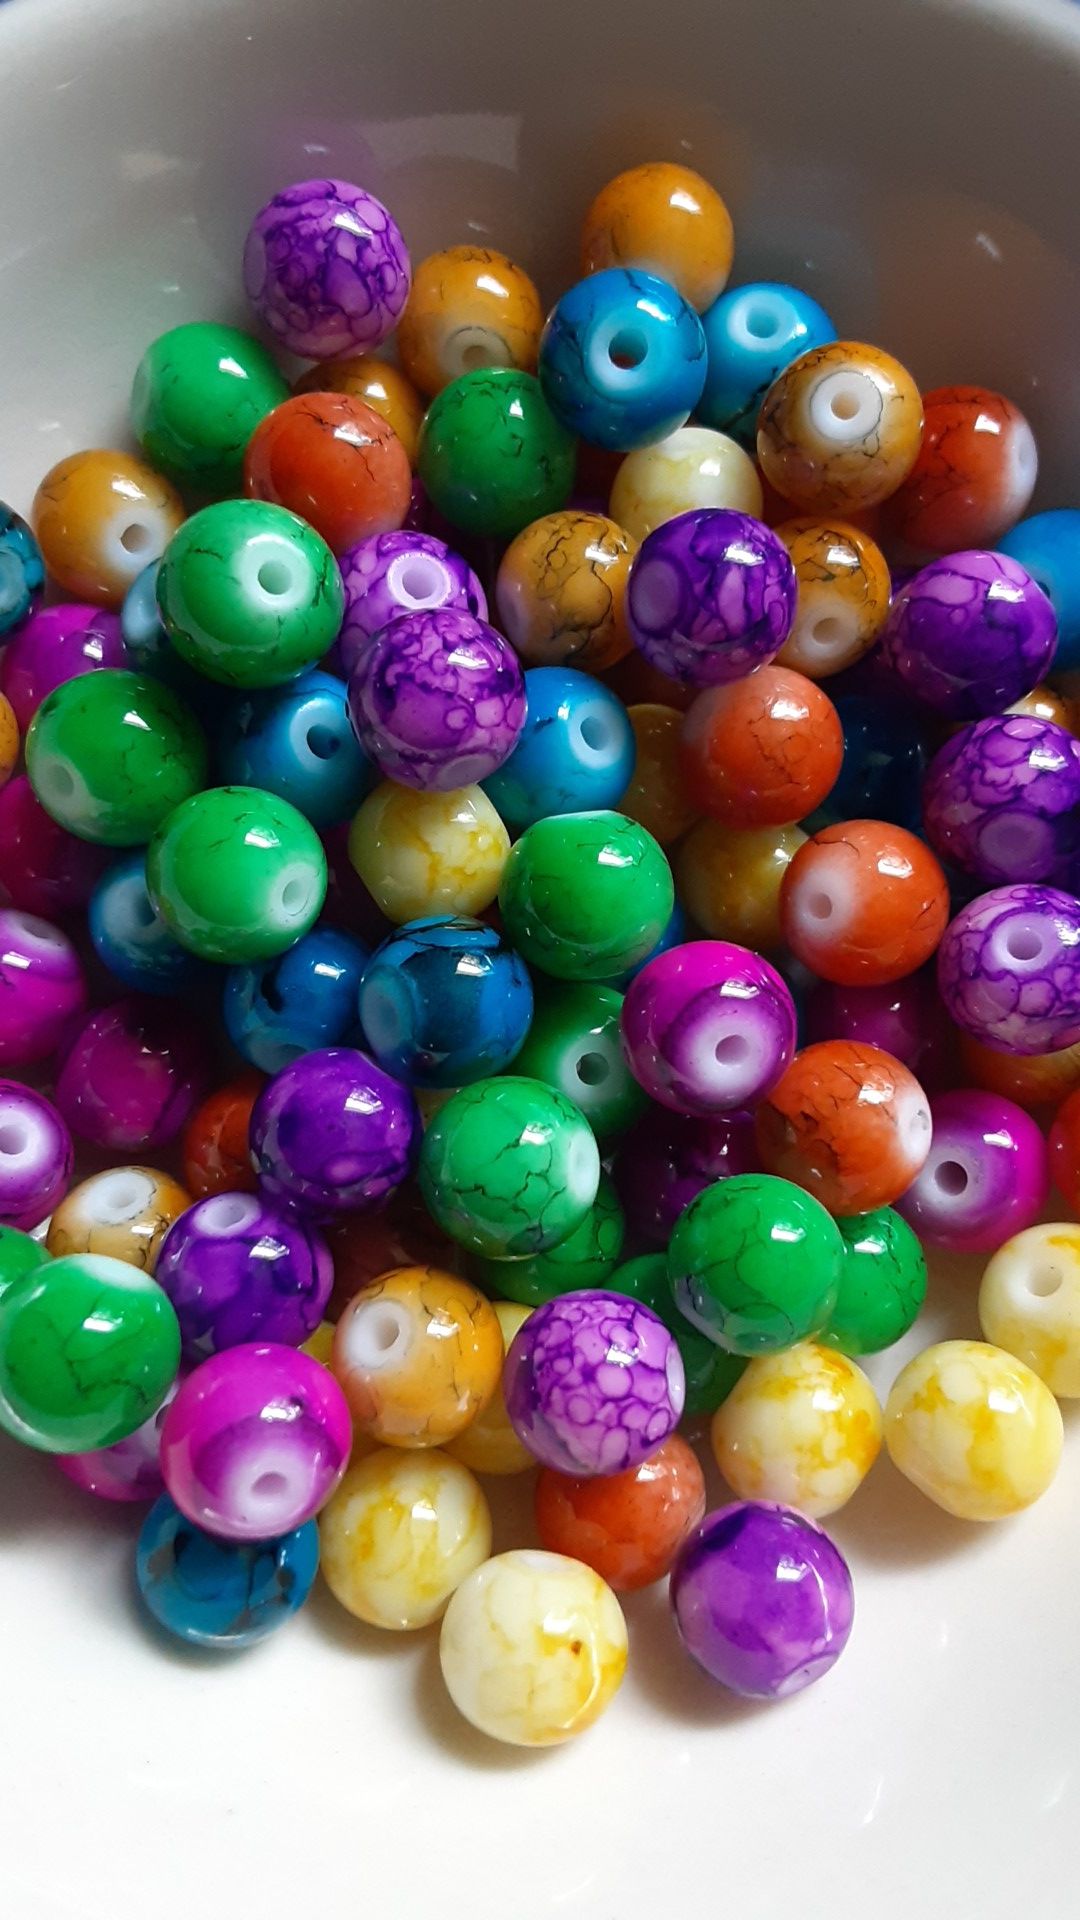 100 pc Mixed Colorful Mottled Glass Beads 8mm